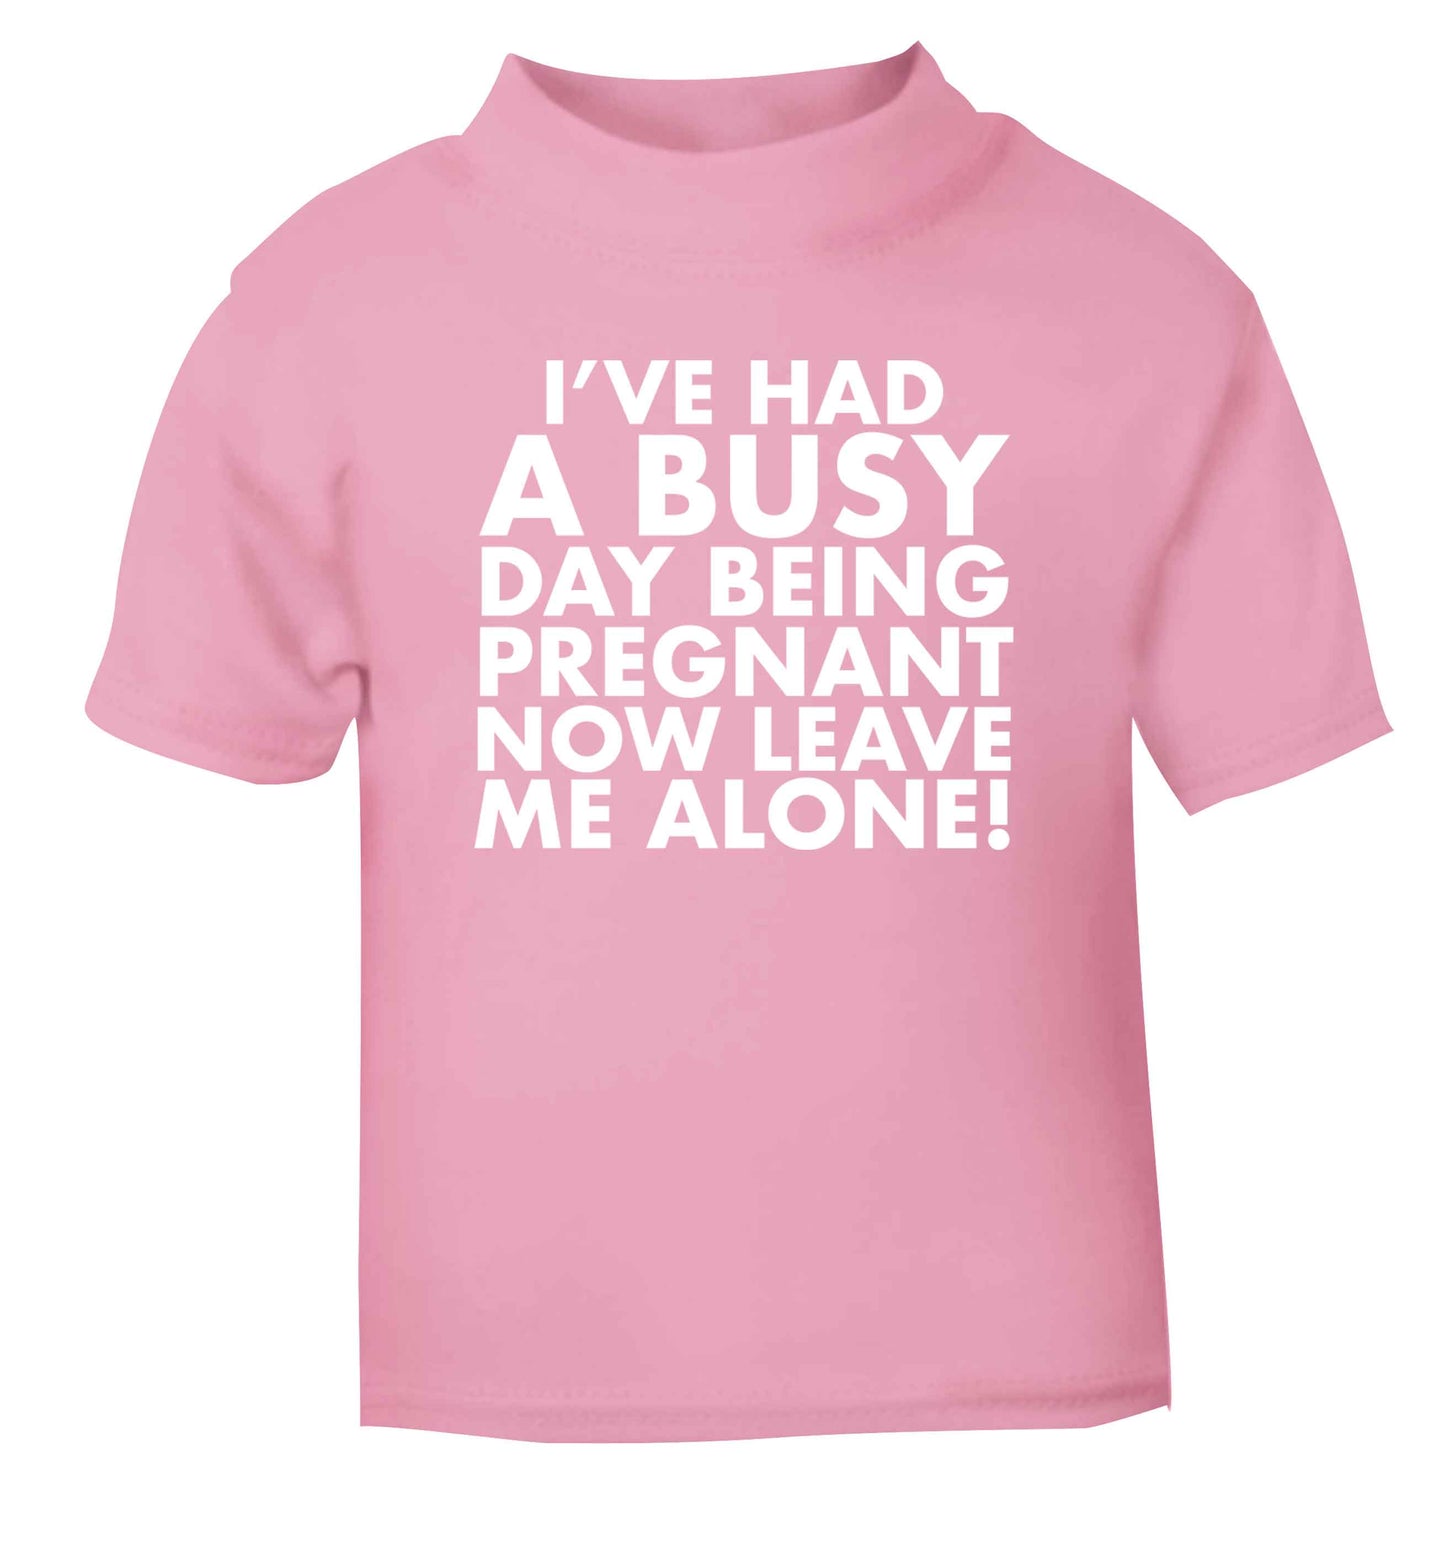 I've had a busy day being pregnant now leave me alone light pink Baby Toddler Tshirt 2 Years